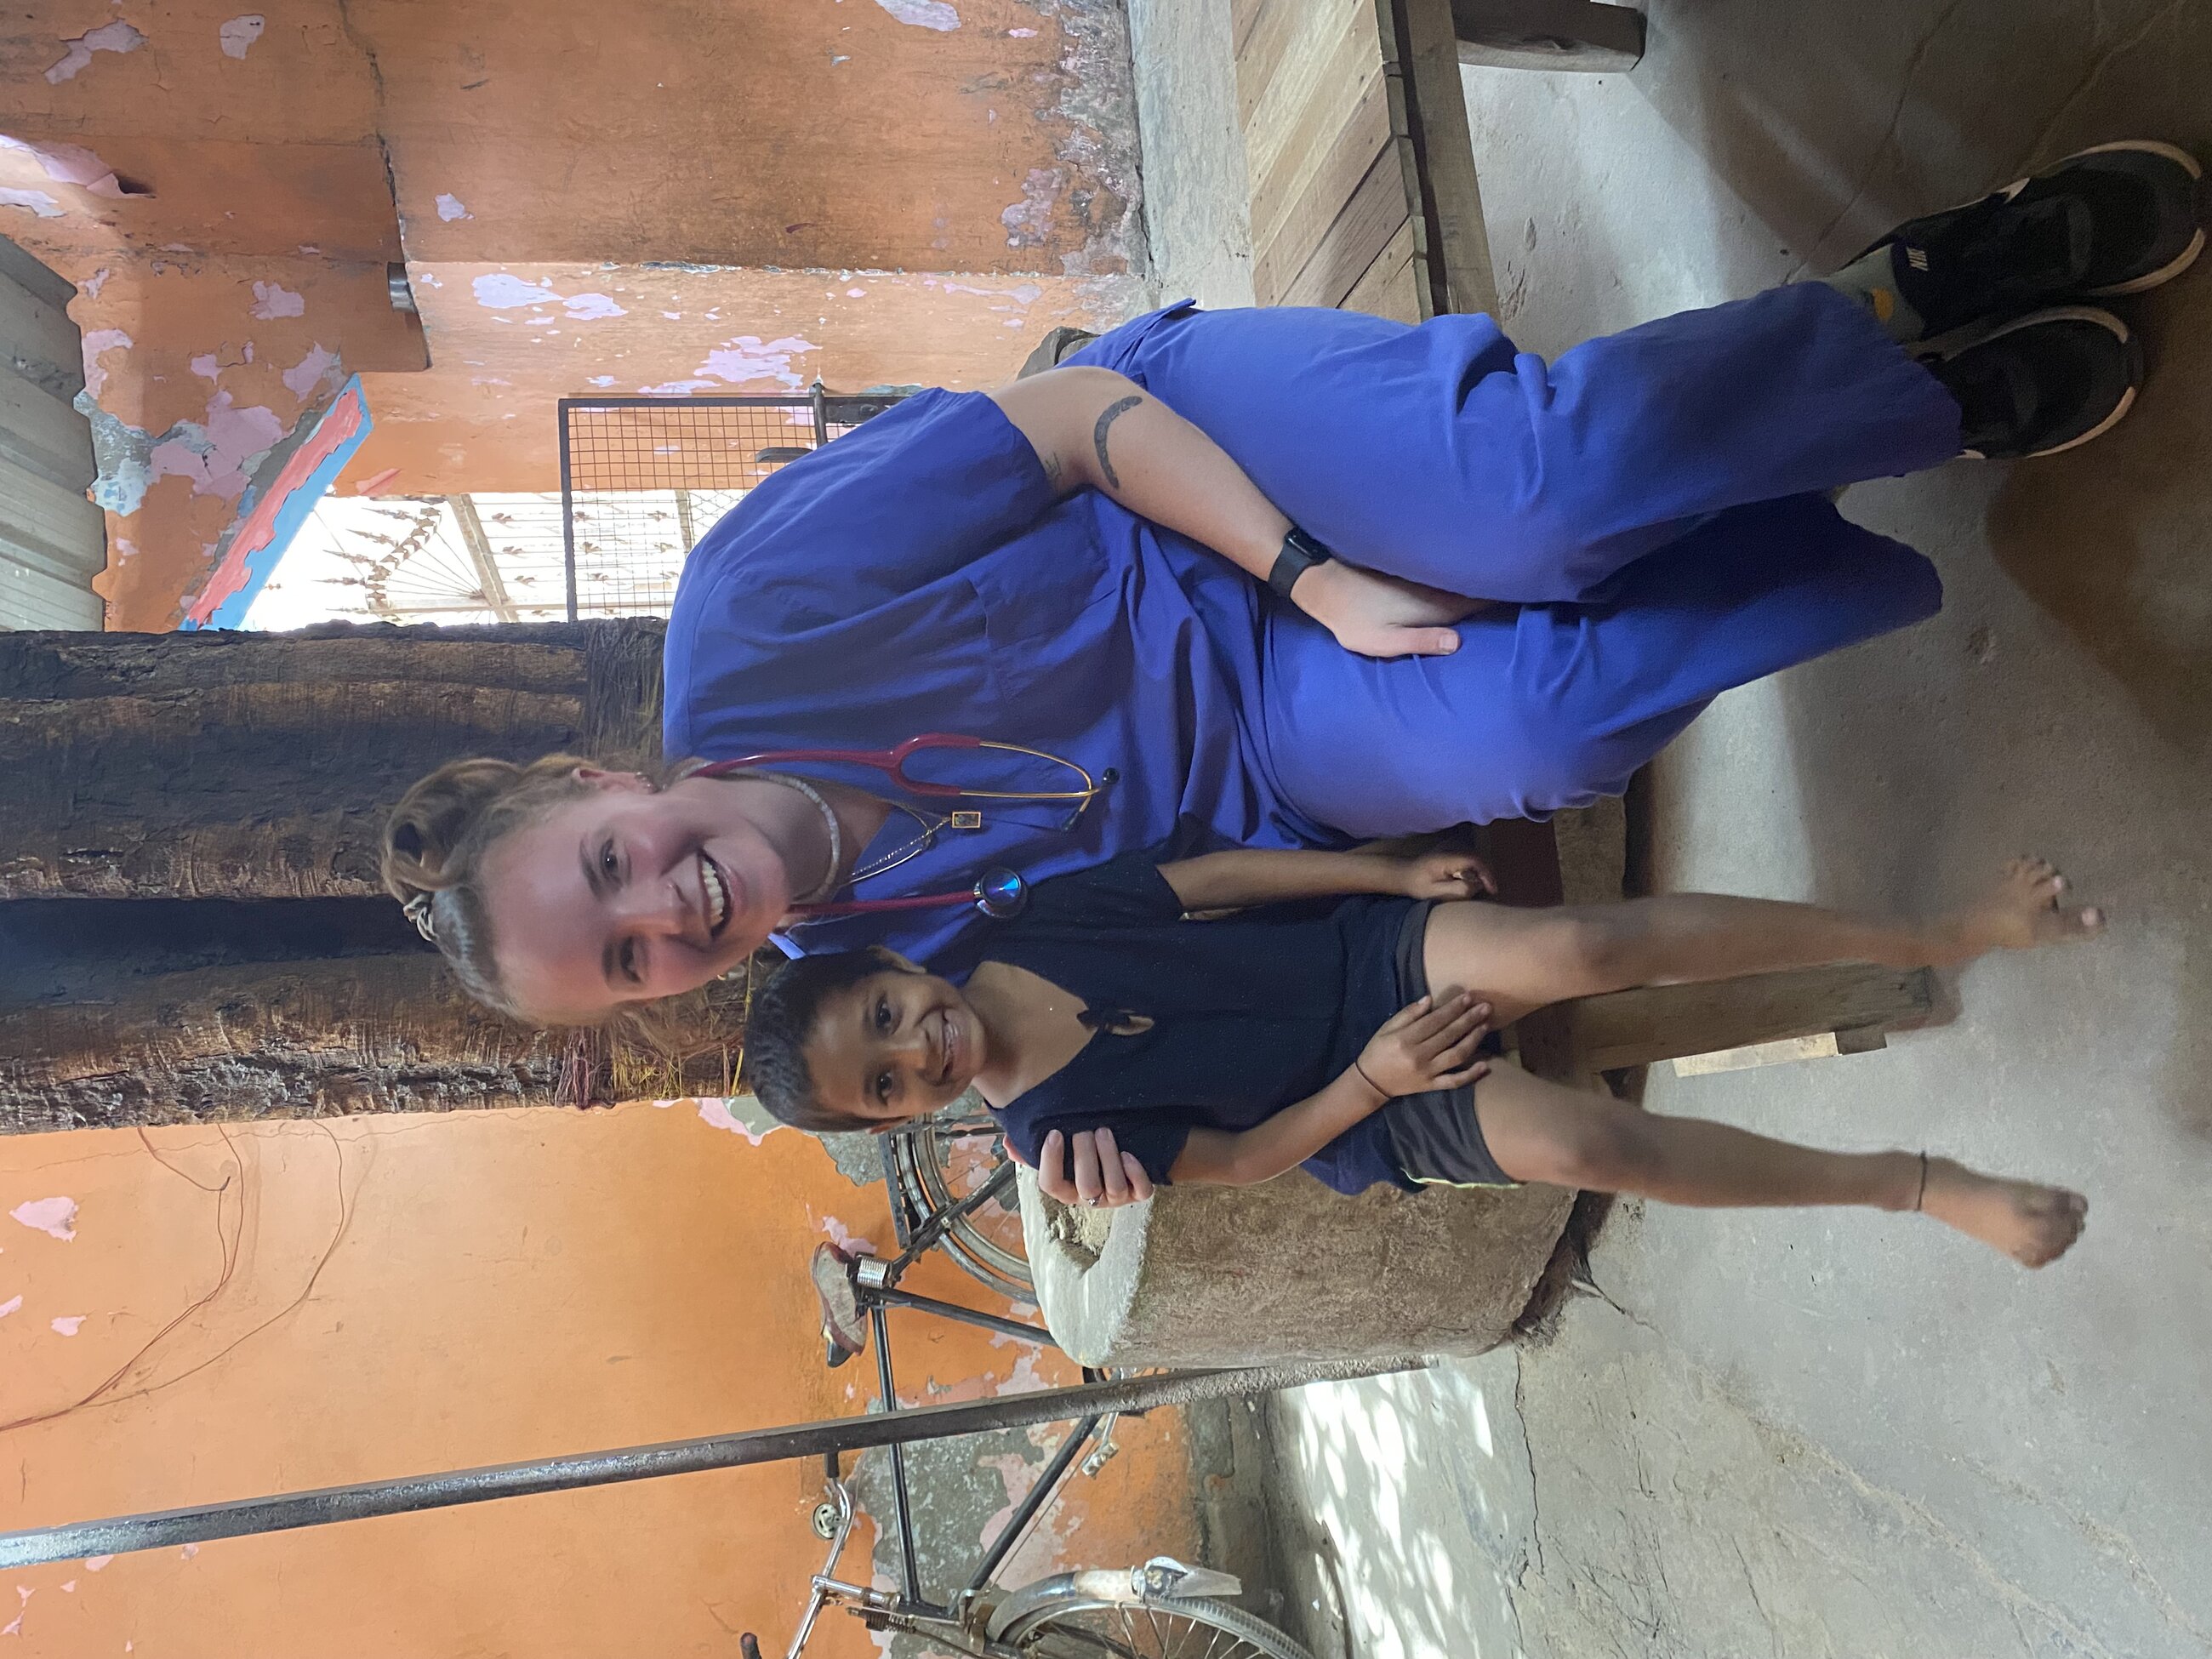 me and one of the kids that came almost daily to the clinic to hang out